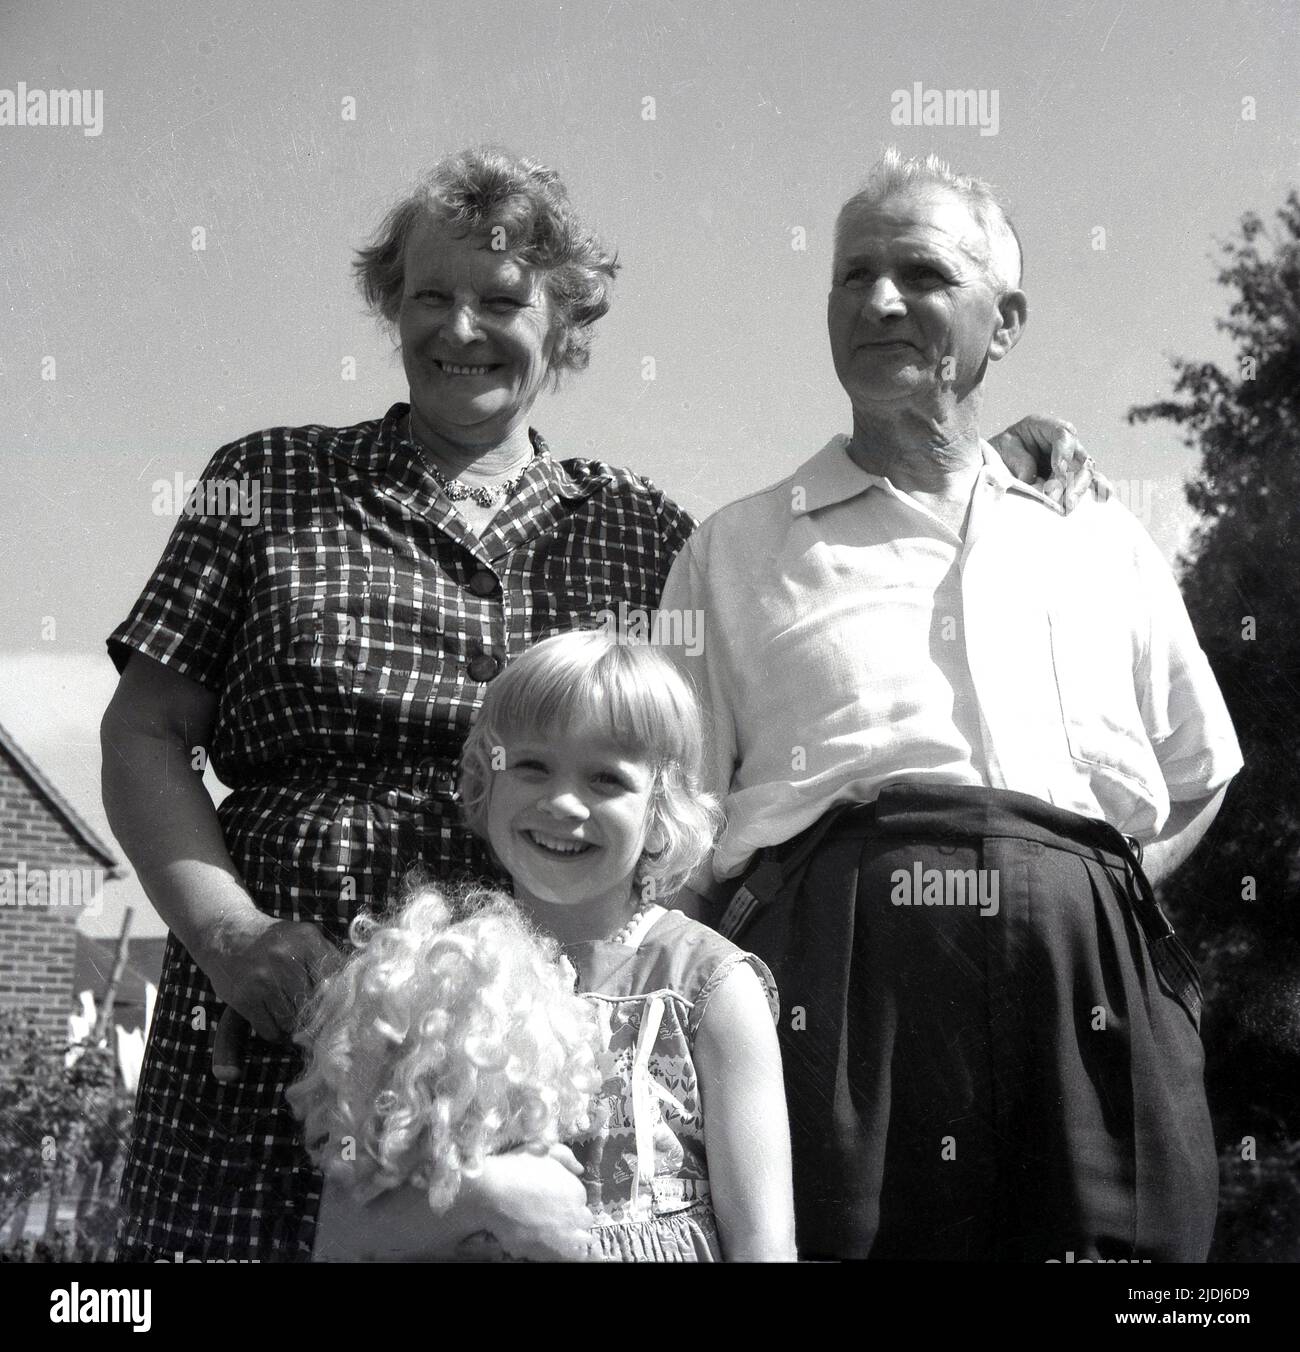 1960s, historical, all smiles, a happy young girl standing outside with her grandparents holding her doll, England, UK. Stock Photo